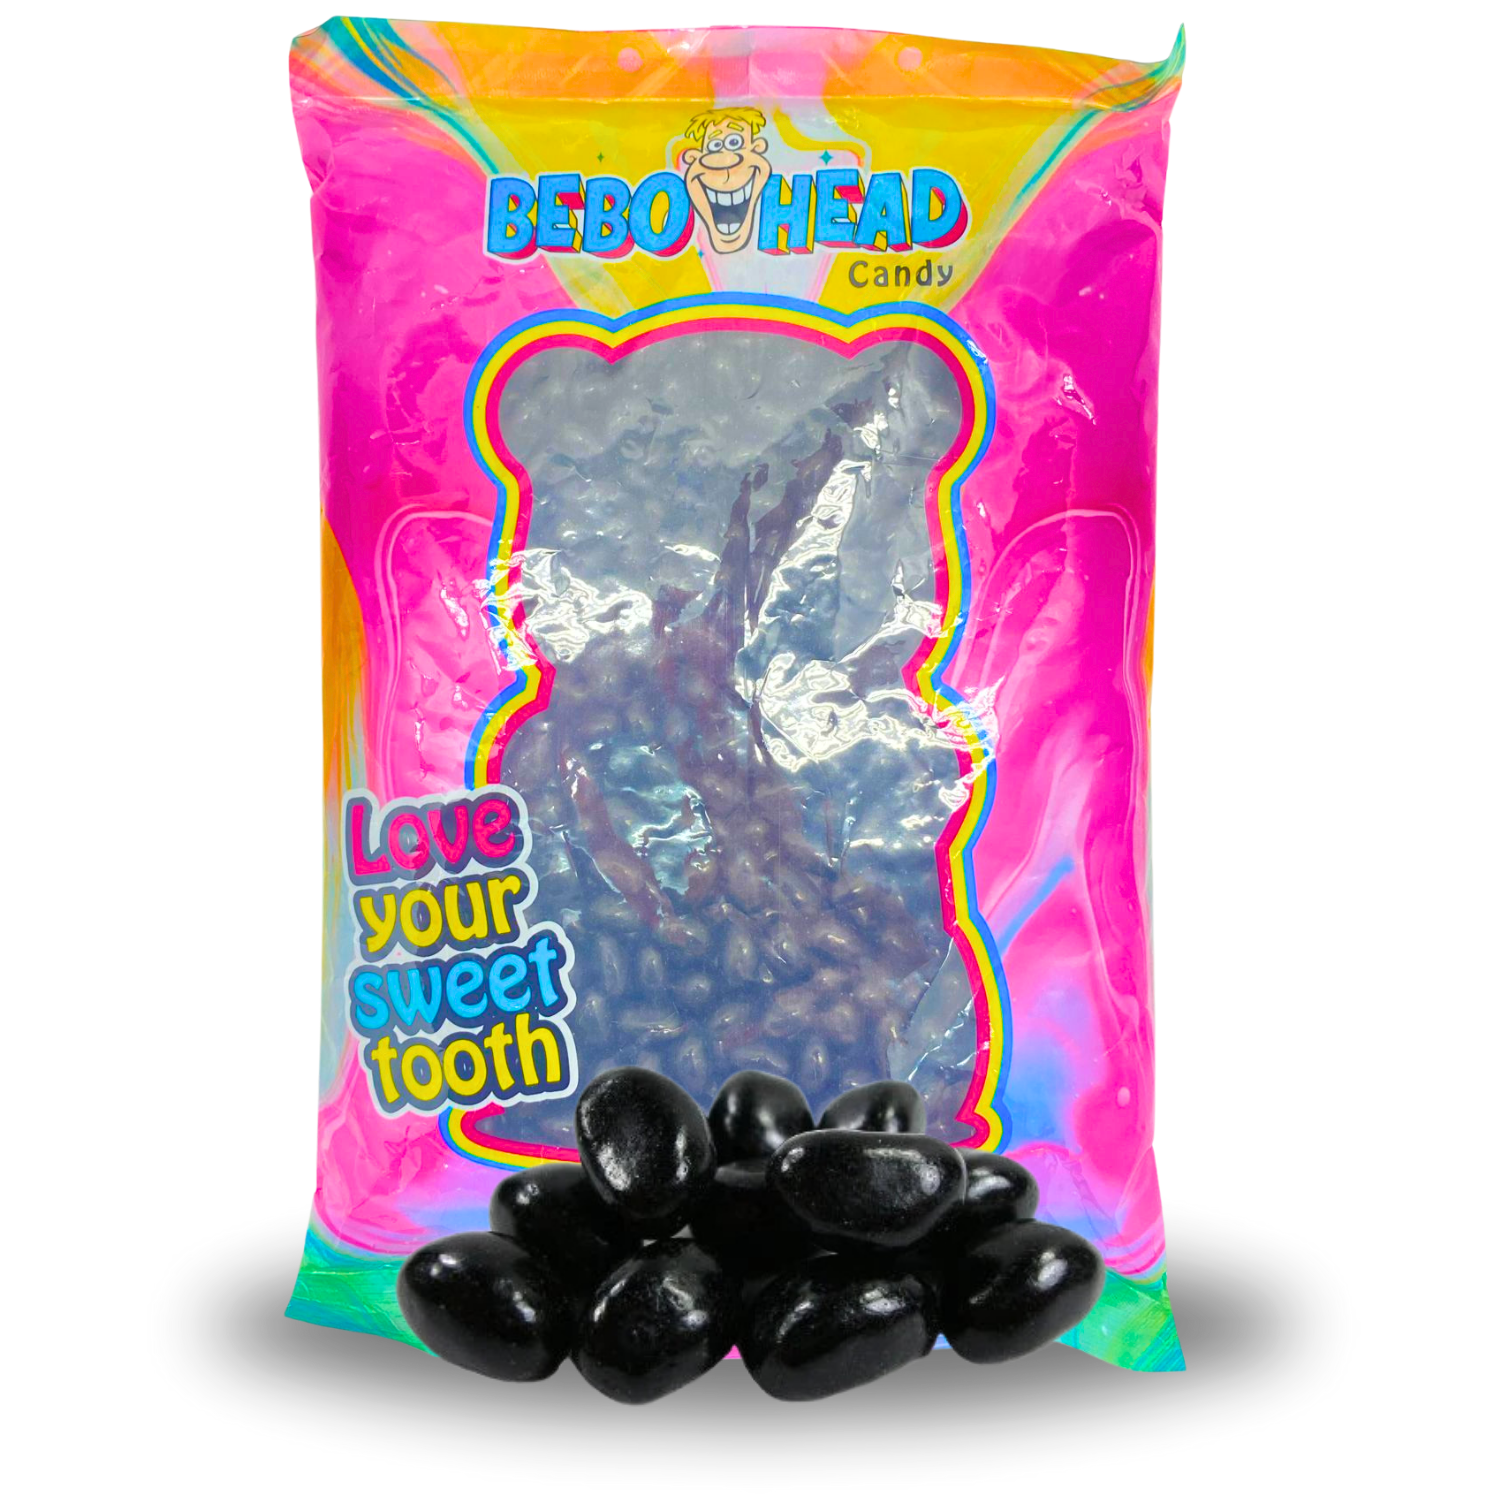 Licorice Jelly Beans - 2.2 Pounds